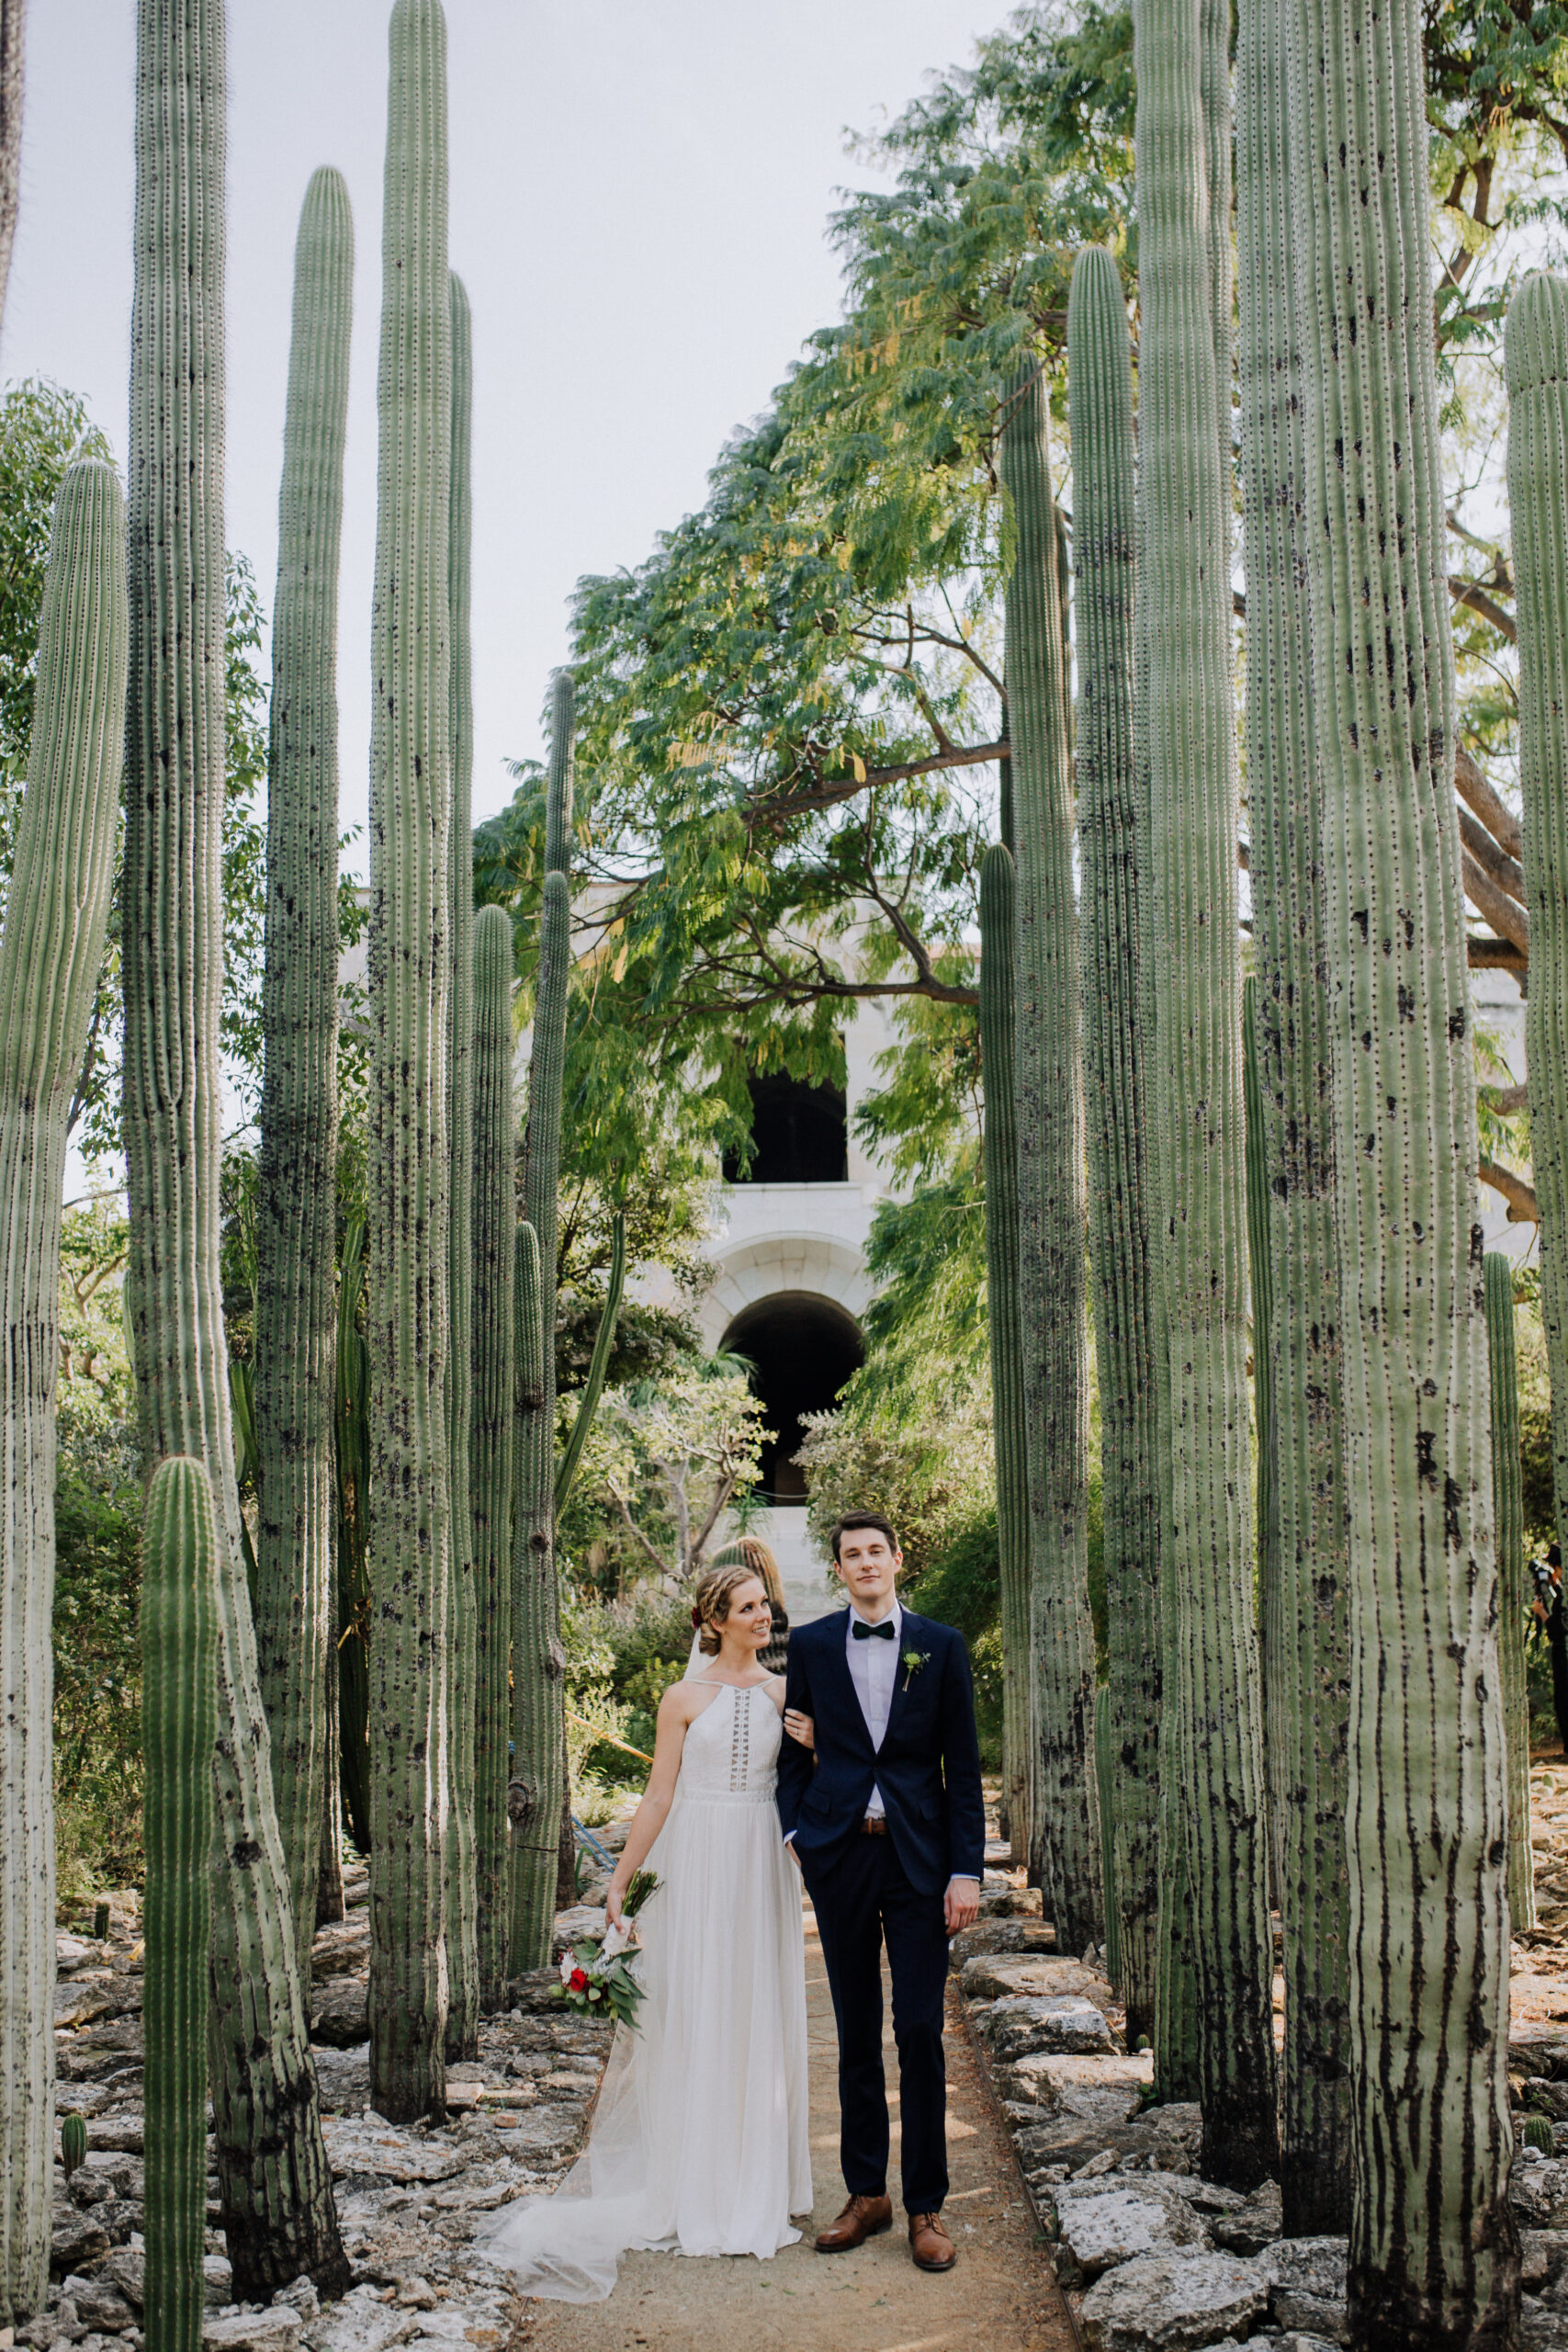 Stunning bride and groom pose in the cactus garden after their dreamy Oaxaca Wedding 